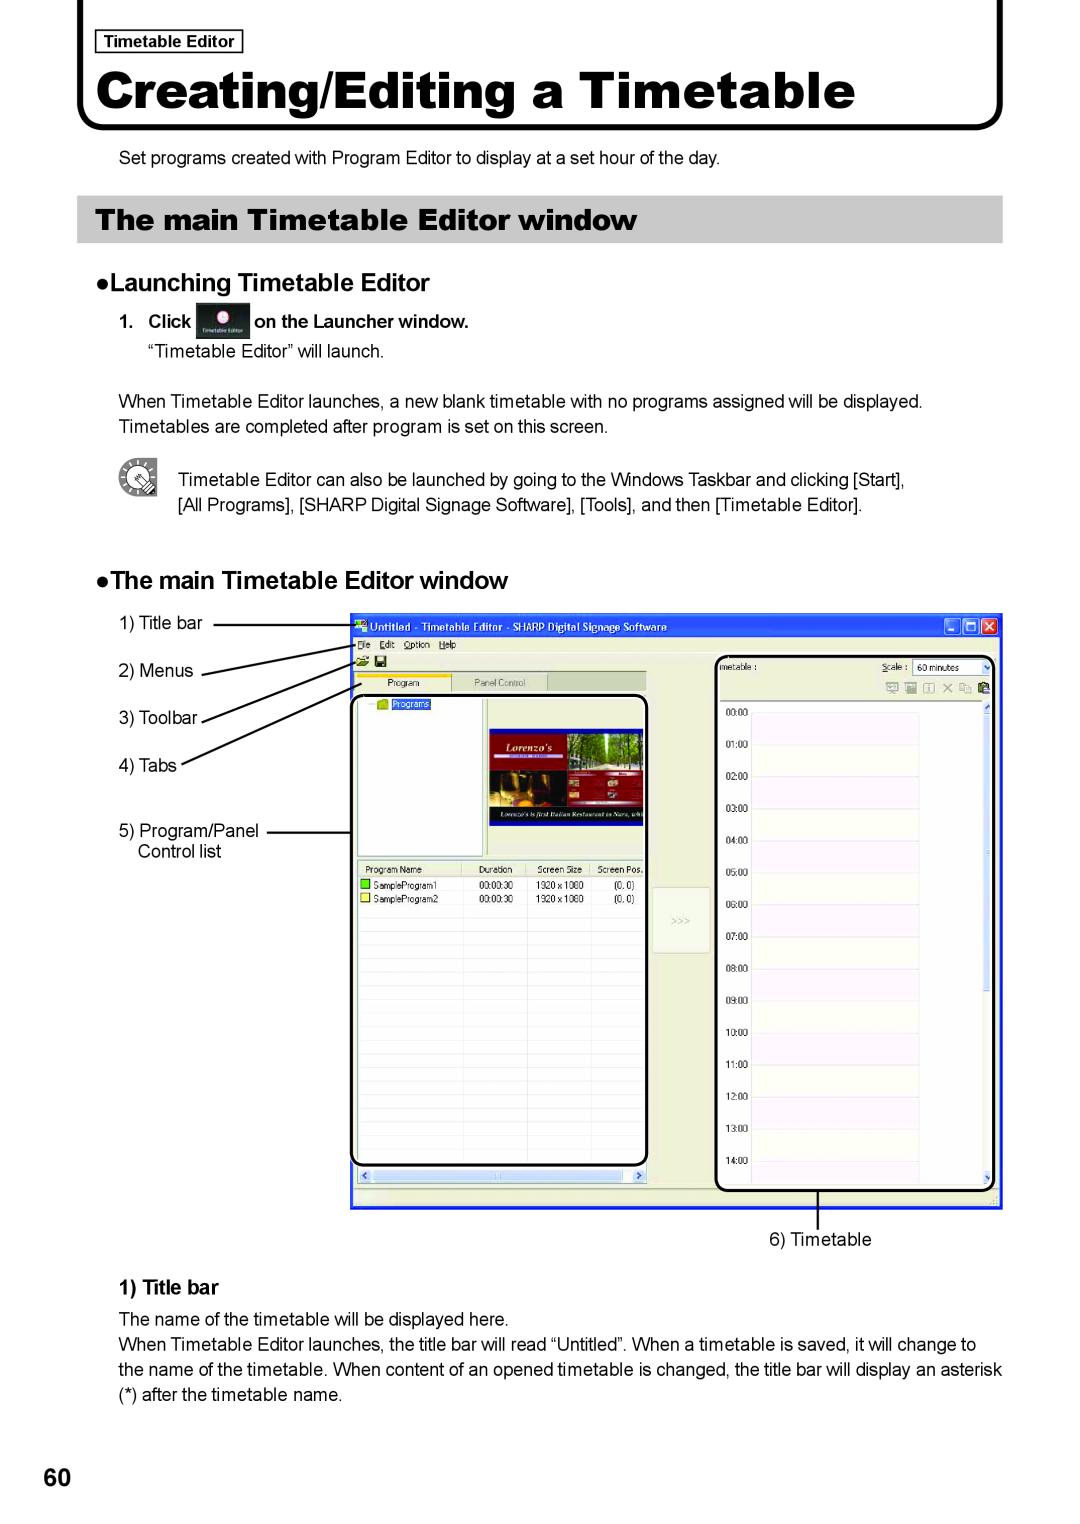 Sharp PNSV01 Creating/Editing a Timetable, The main Timetable Editor window, Launching Timetable Editor, Title bar 